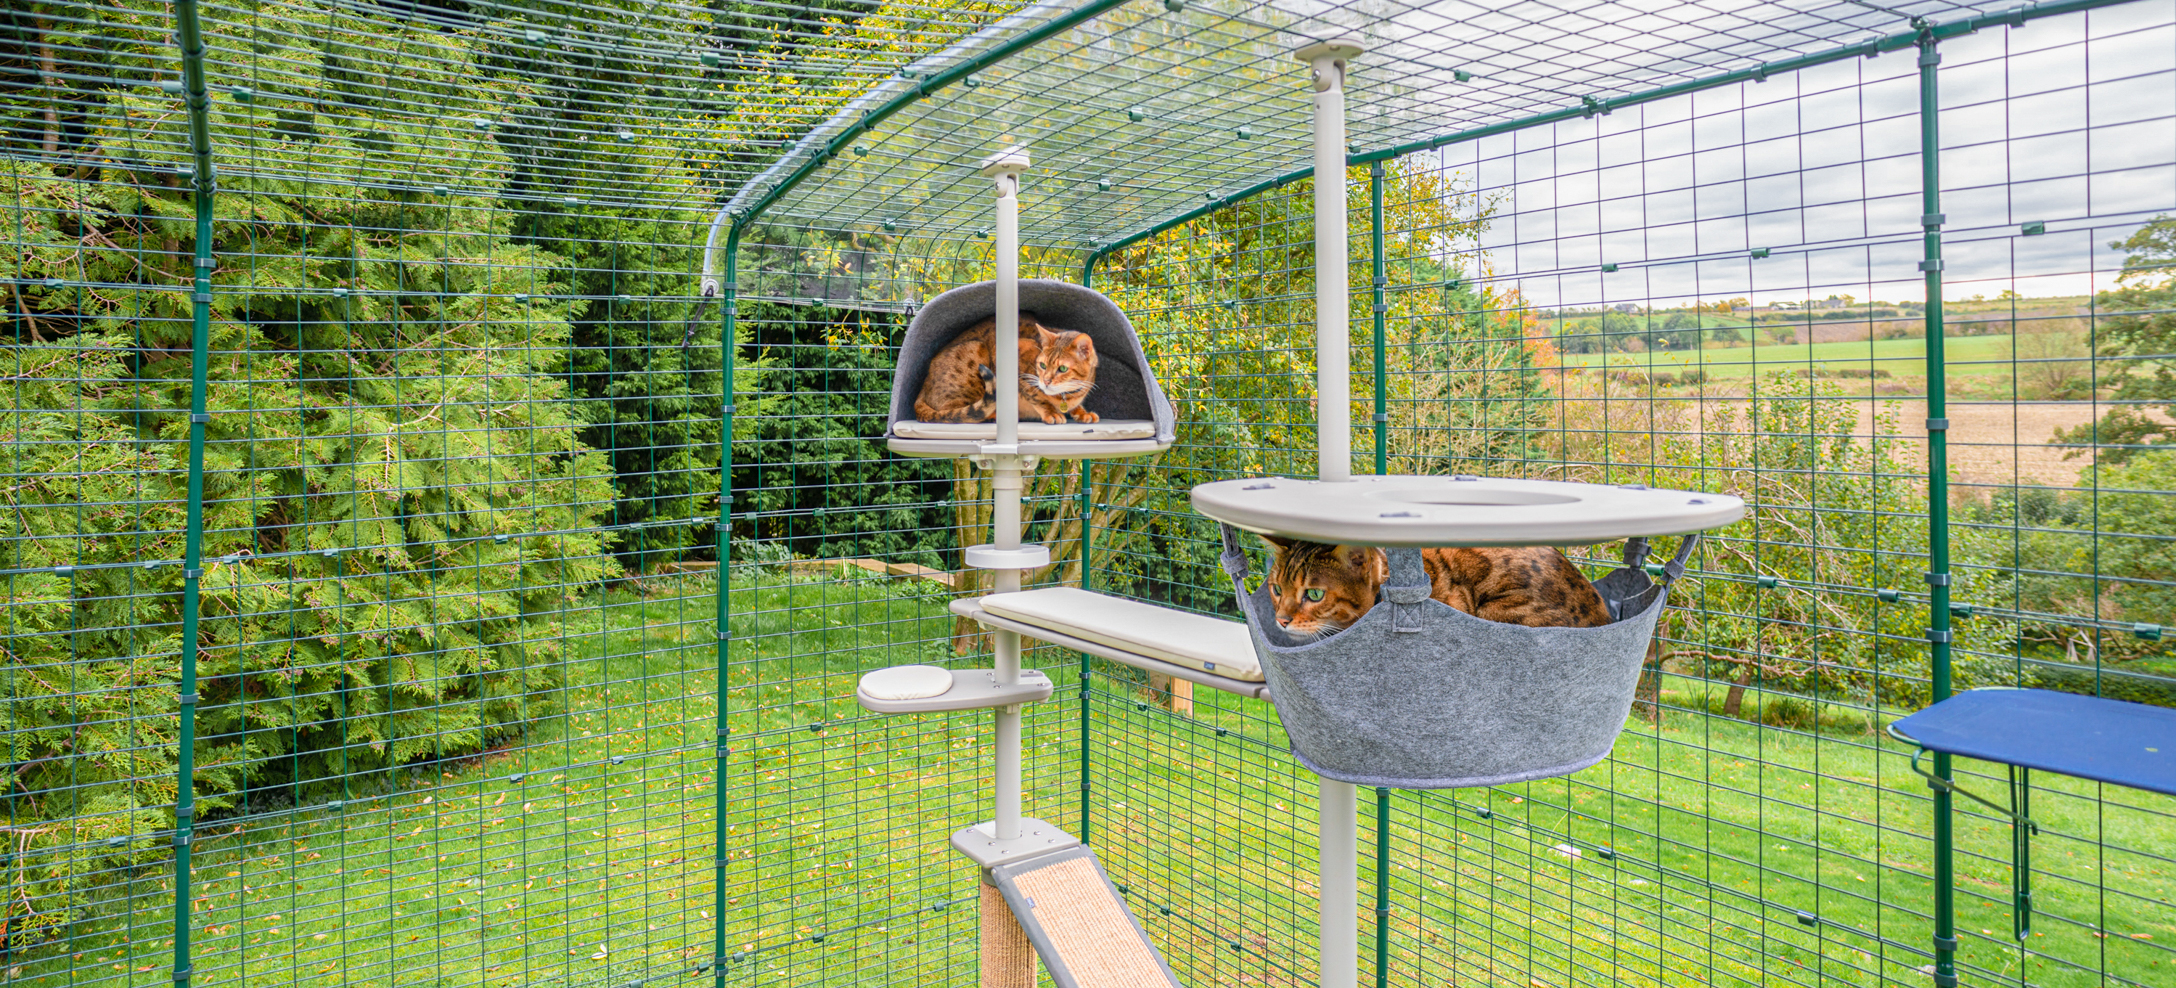 cats relaxing in den and hammock on outdoor cat tree